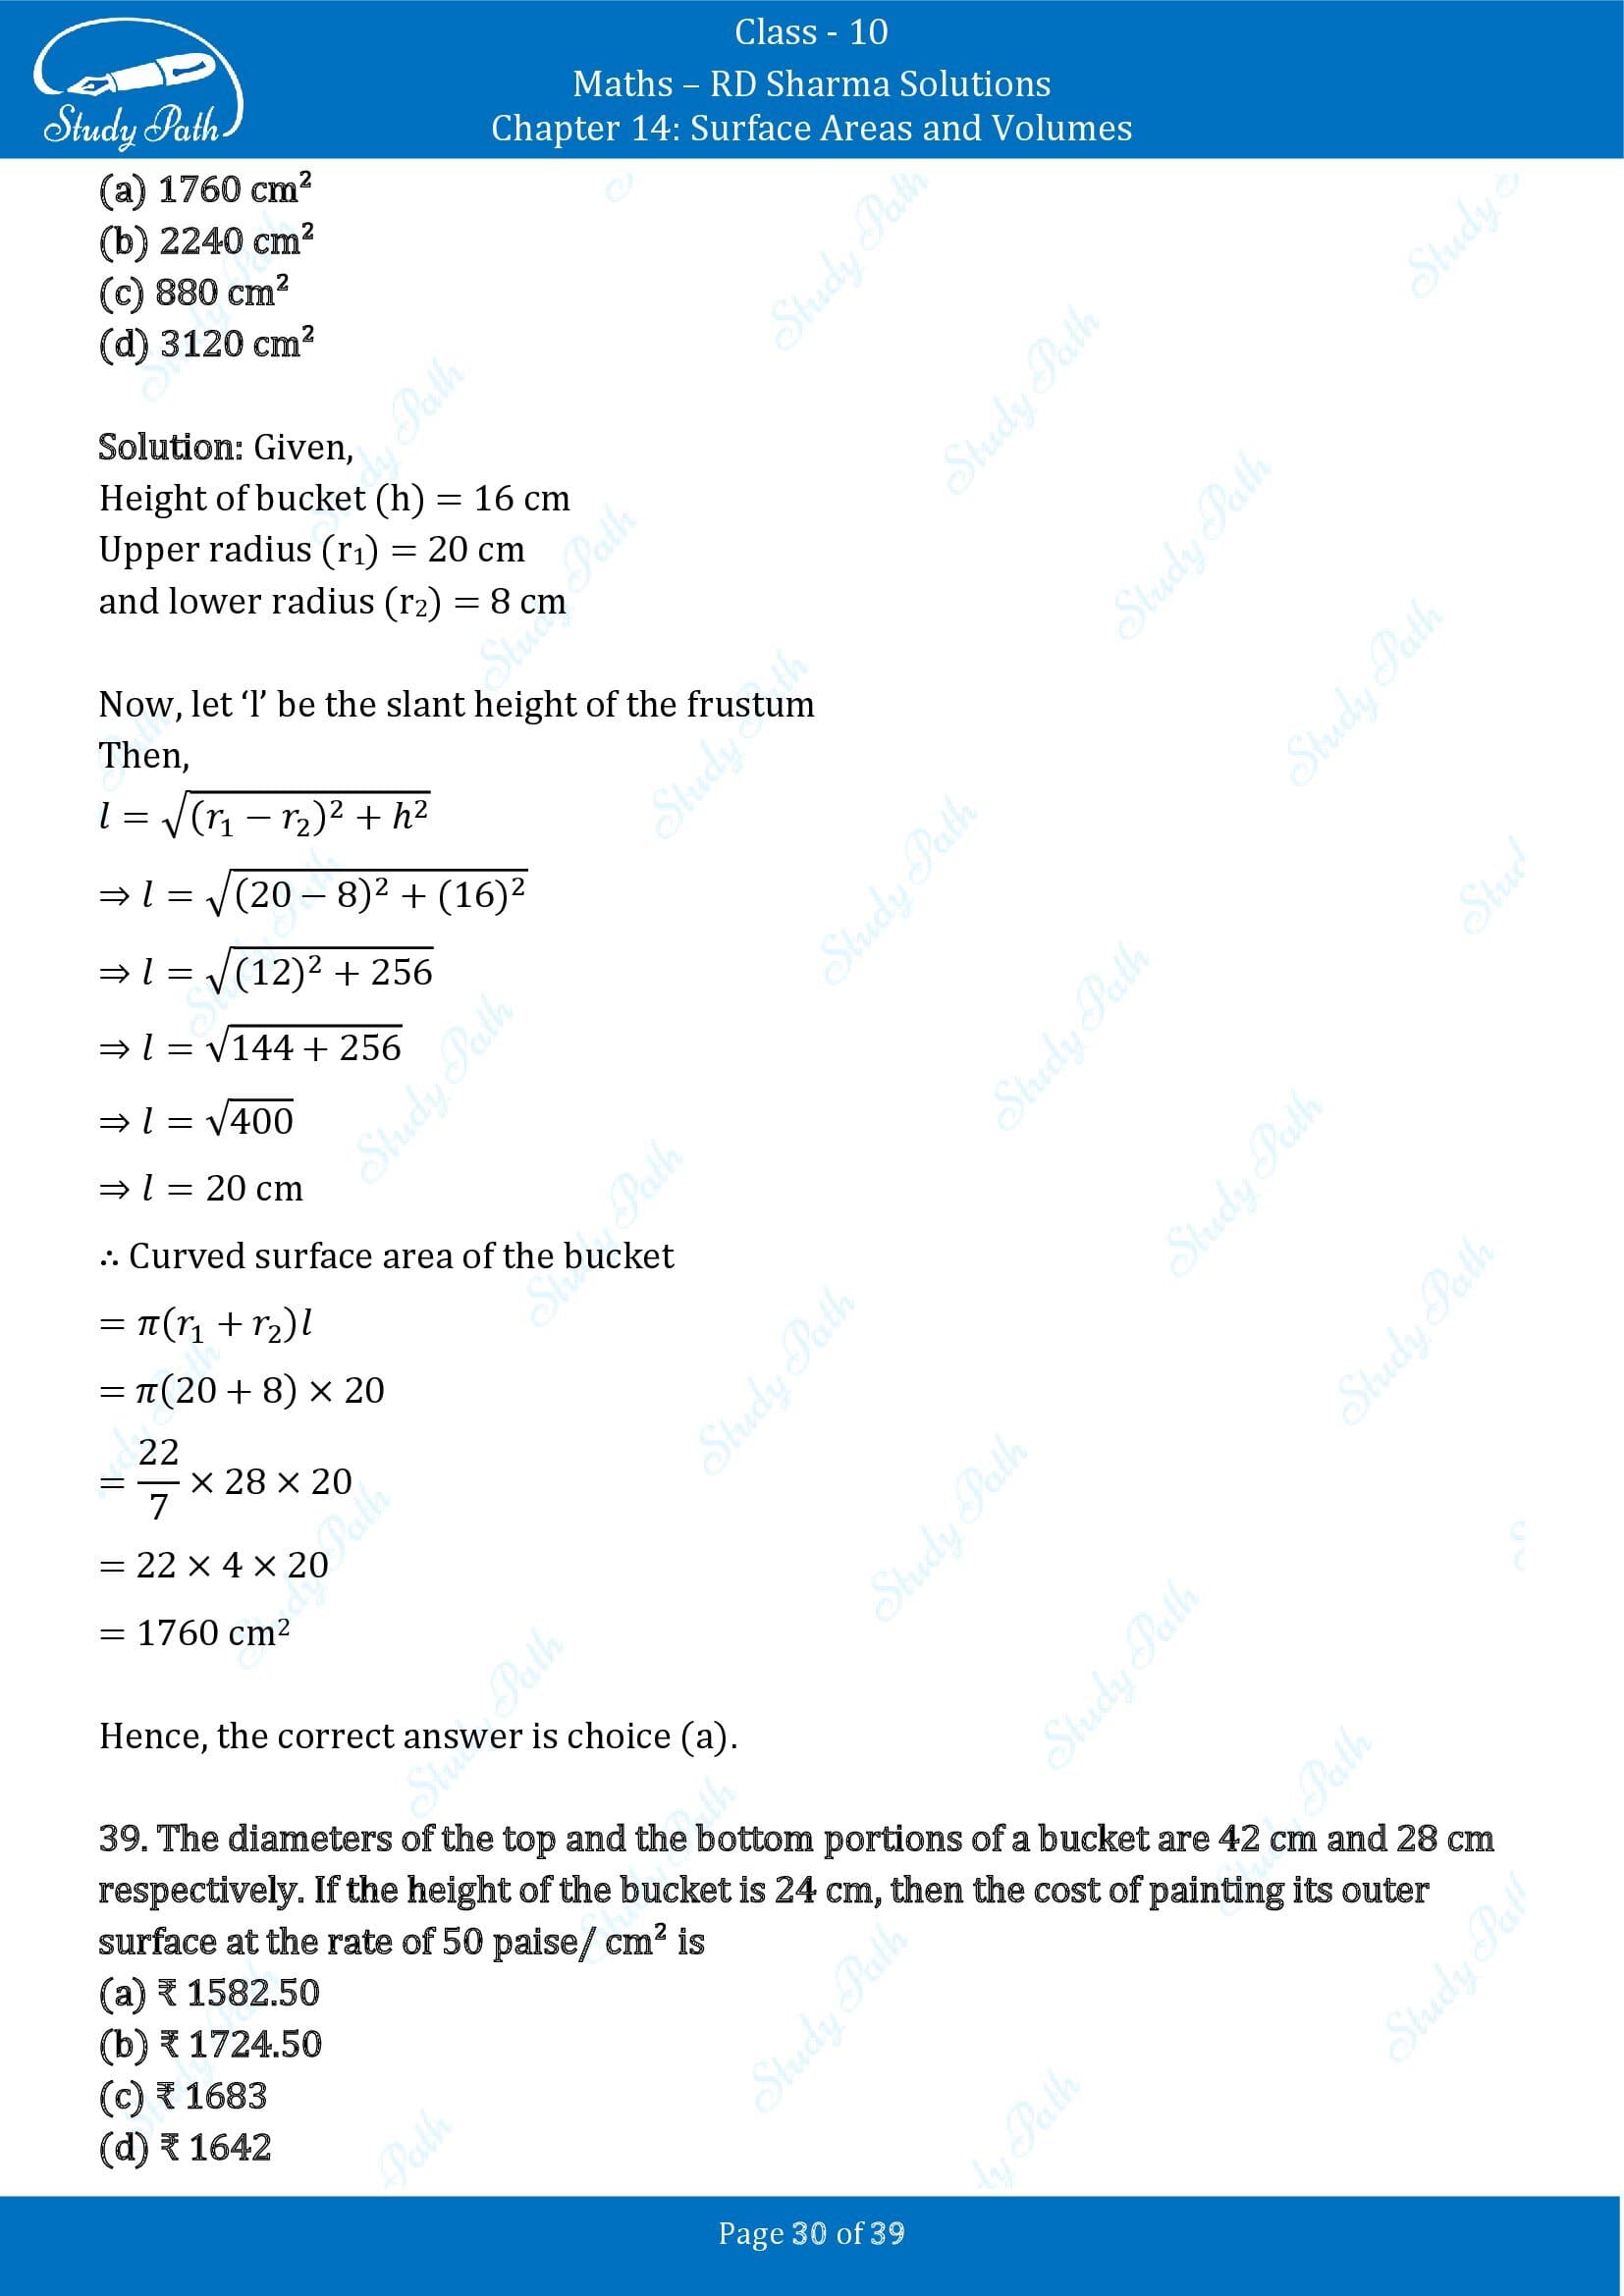 RD Sharma Solutions Class 10 Chapter 14 Surface Areas and Volumes Multiple Choice Question MCQs 00030